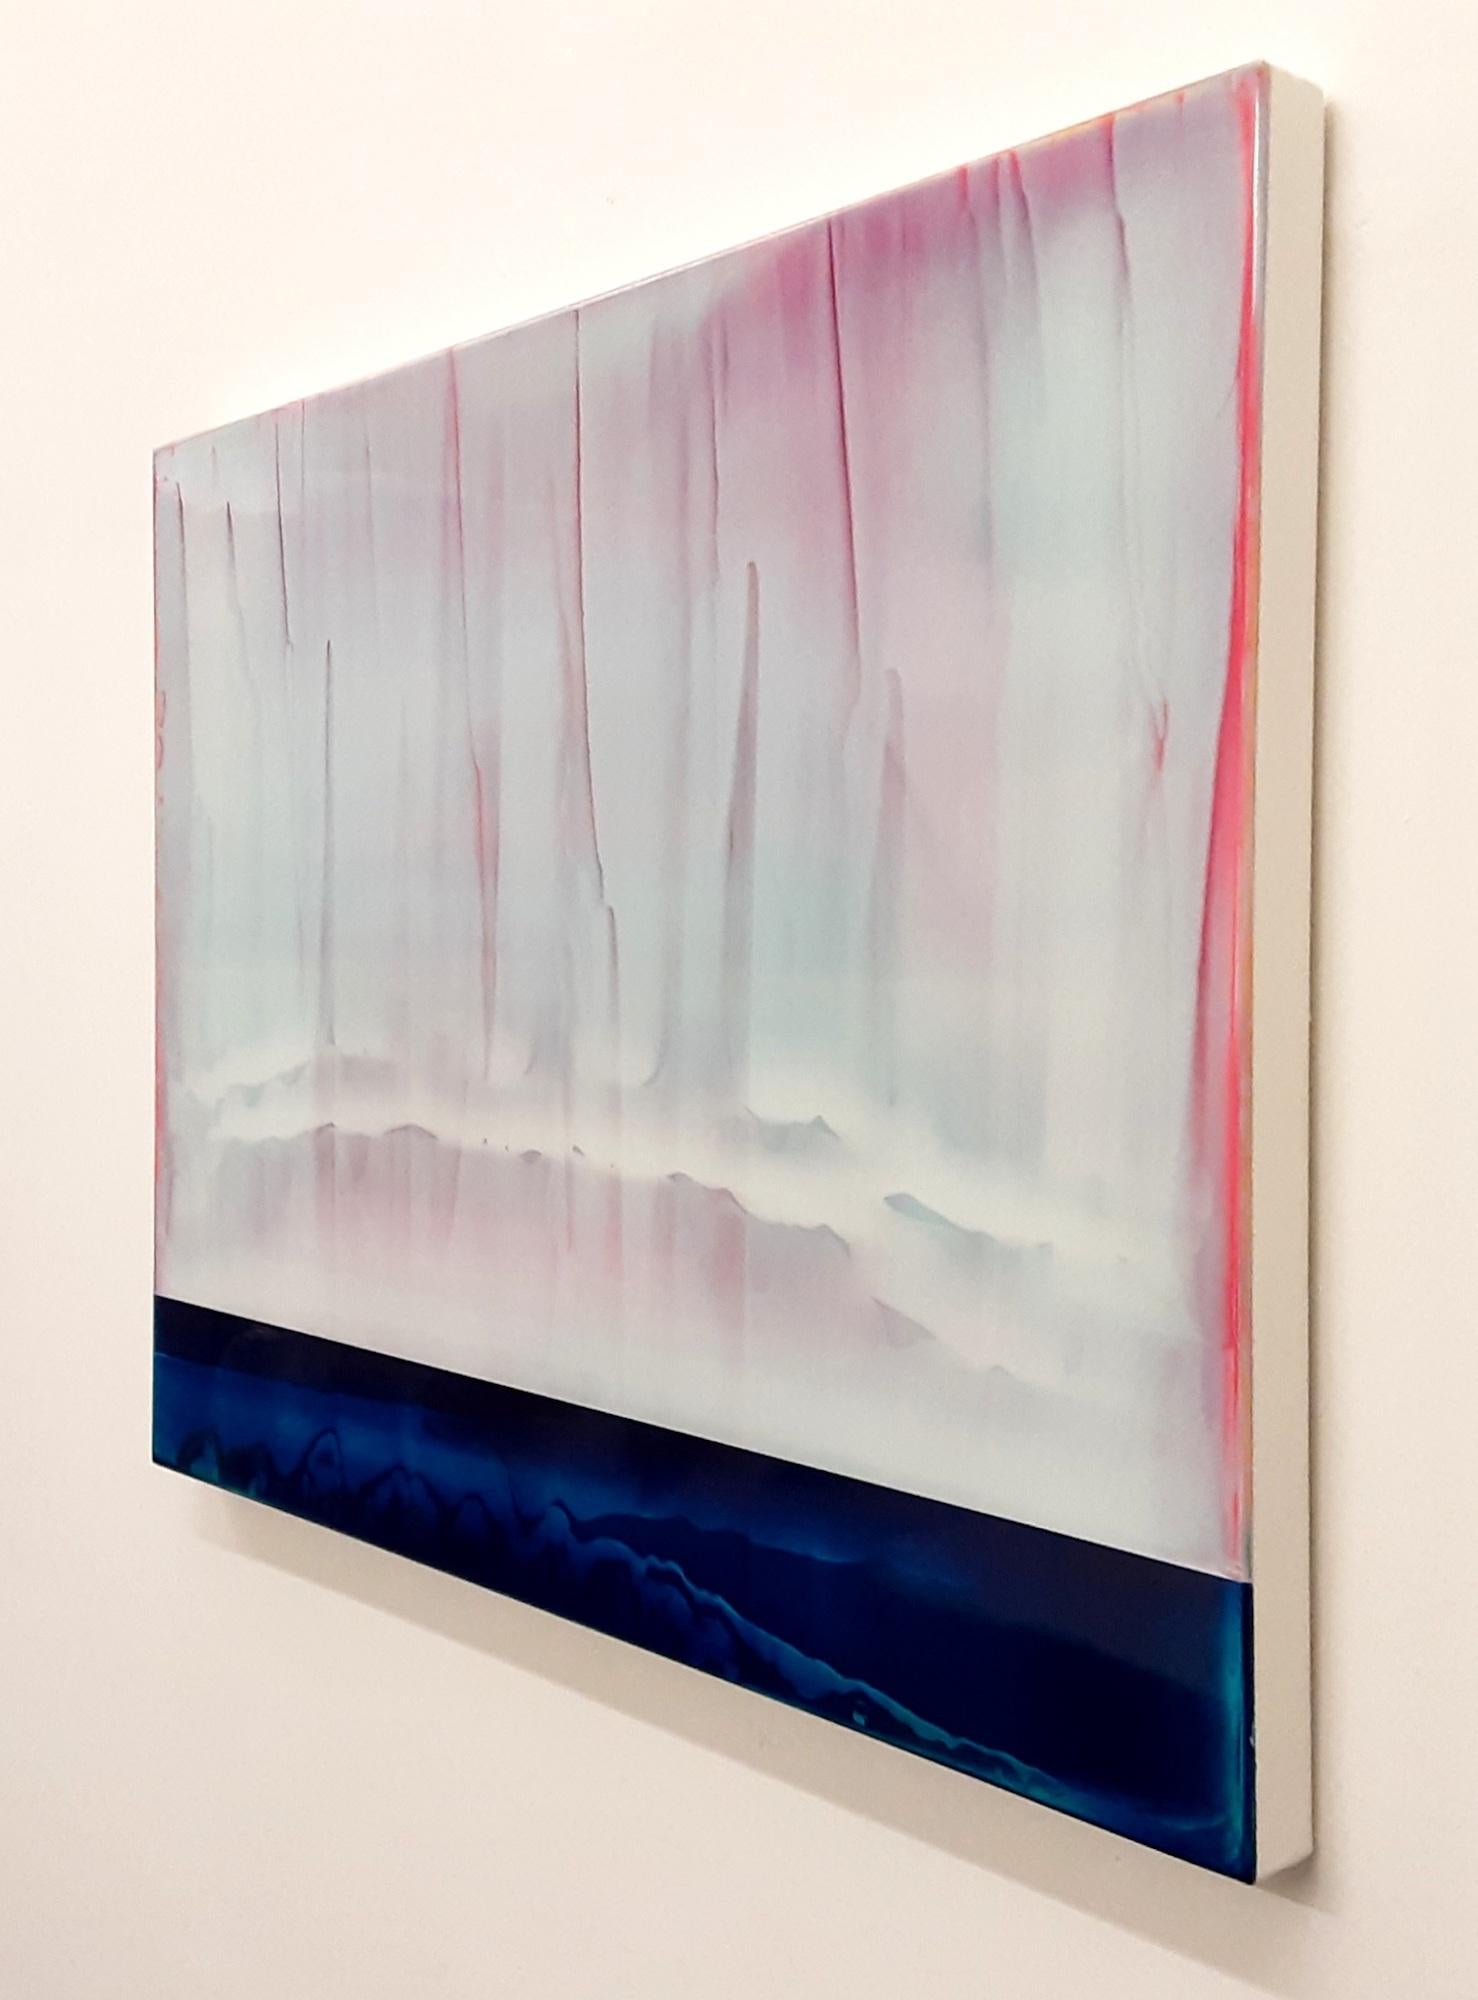 Lucent (4/19) by James Lumsden - Abstract colour painting, pink and light blue For Sale 3